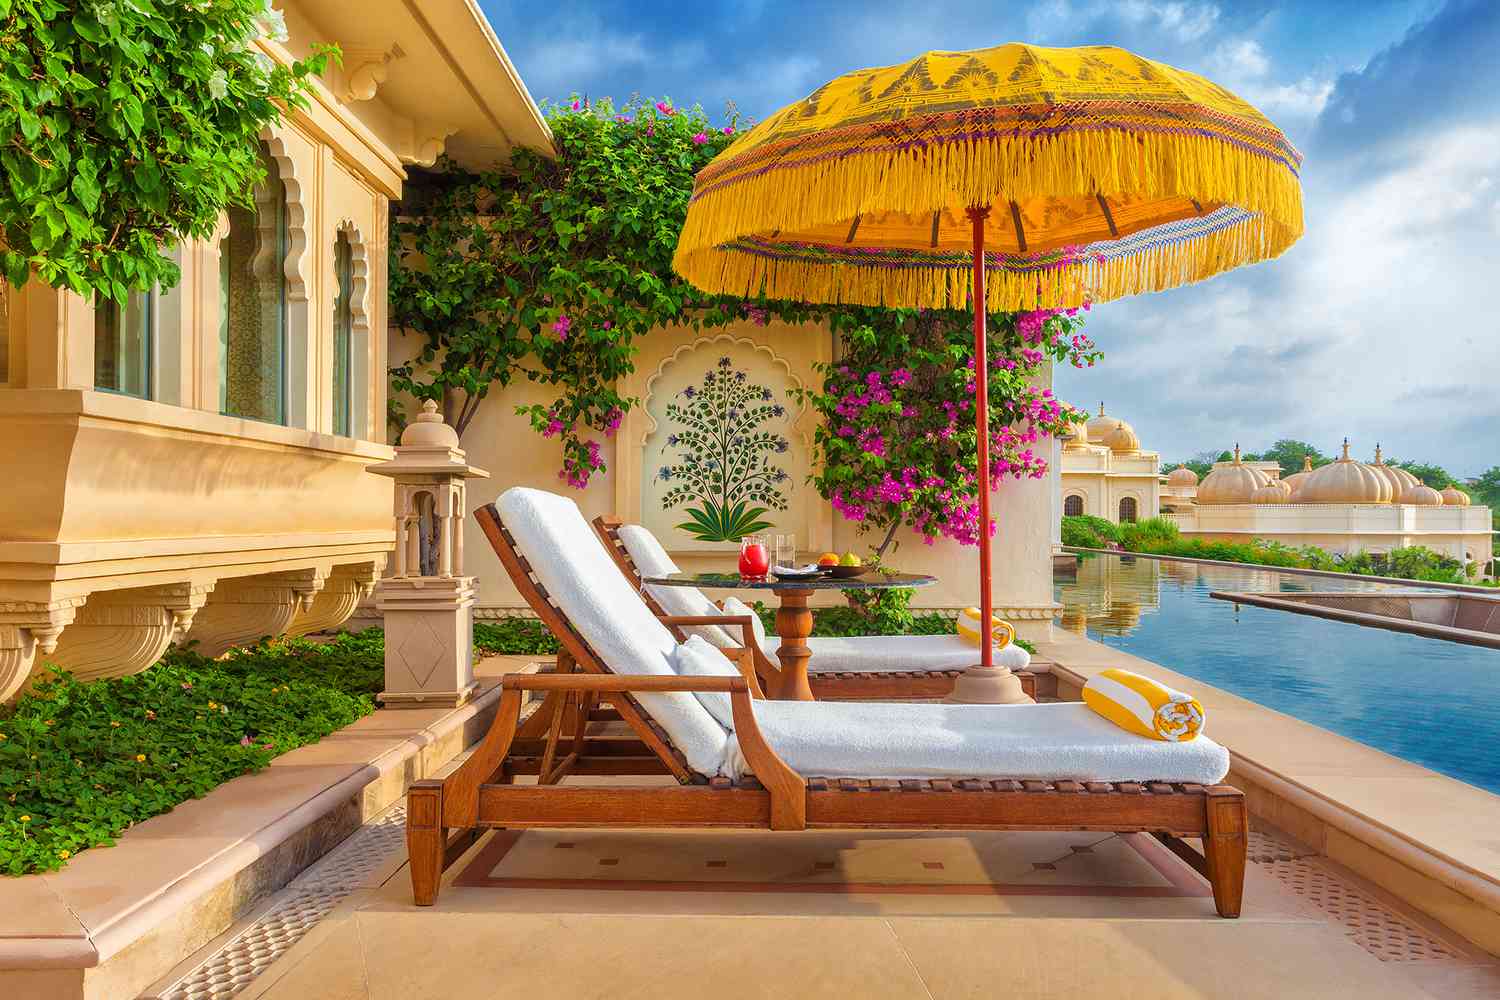 Lounge seating next to pool at The Oberoi Udaivilas, Udaipur